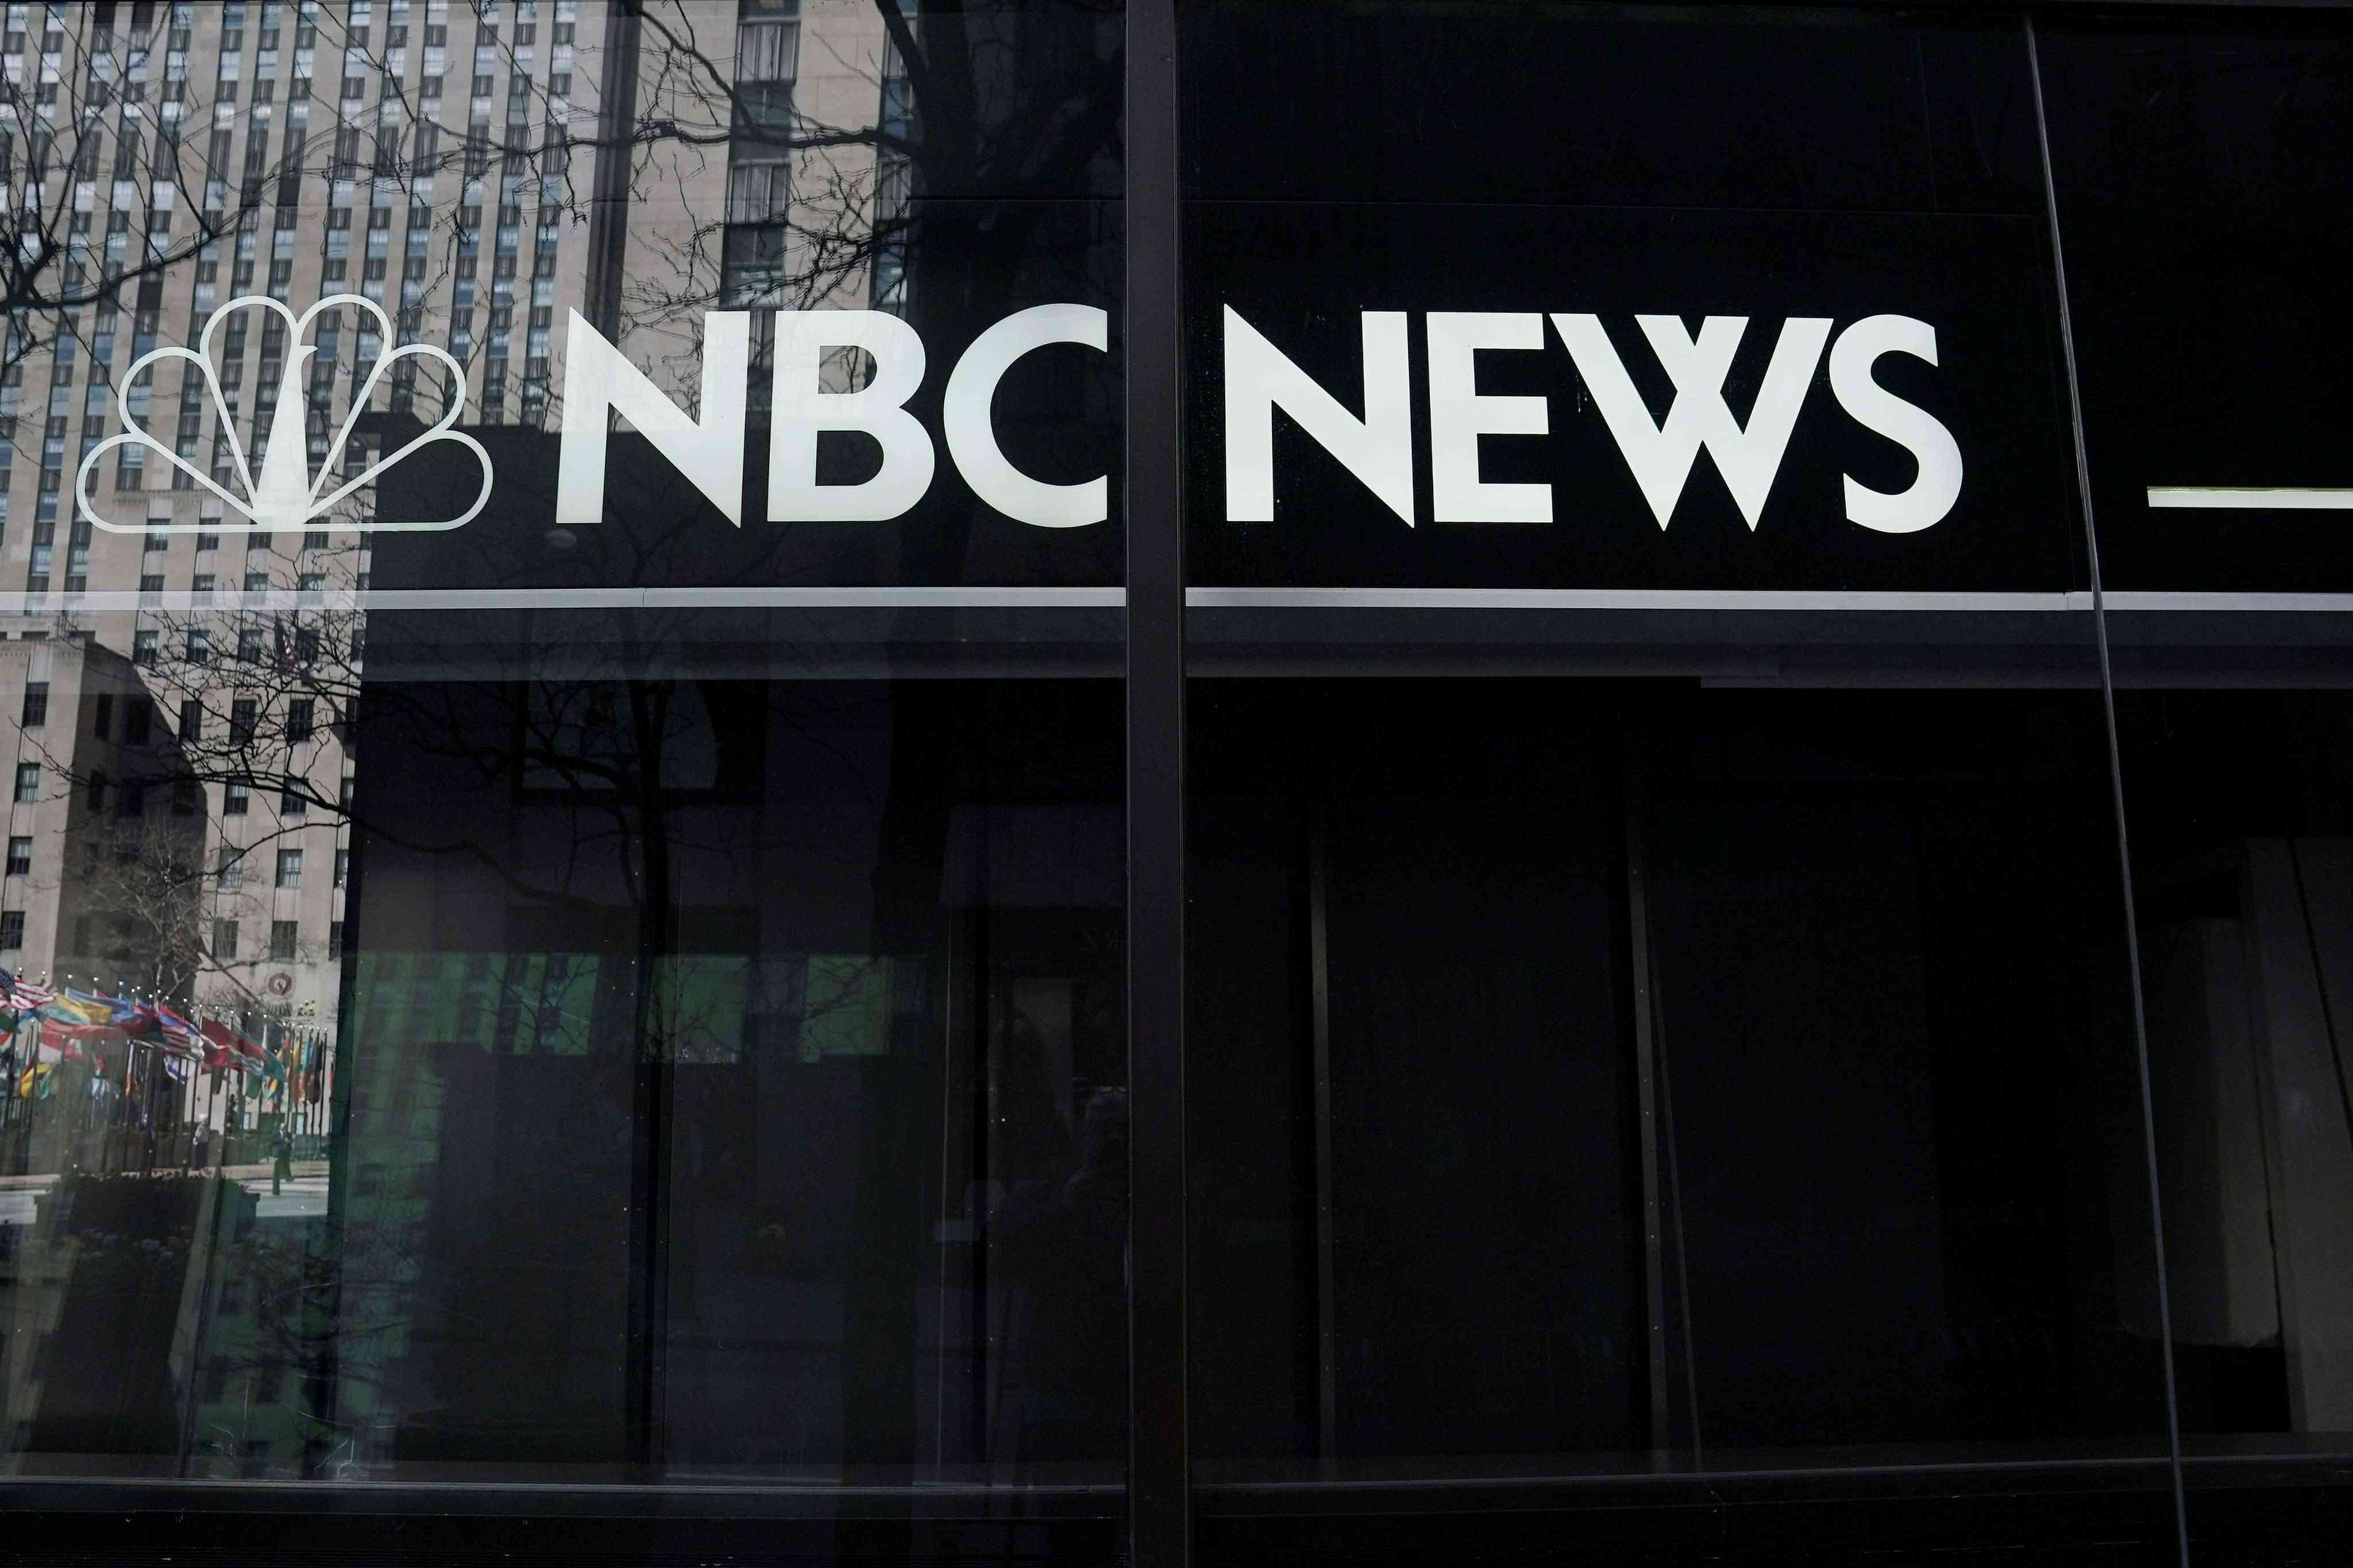 20-facts-about-nbc